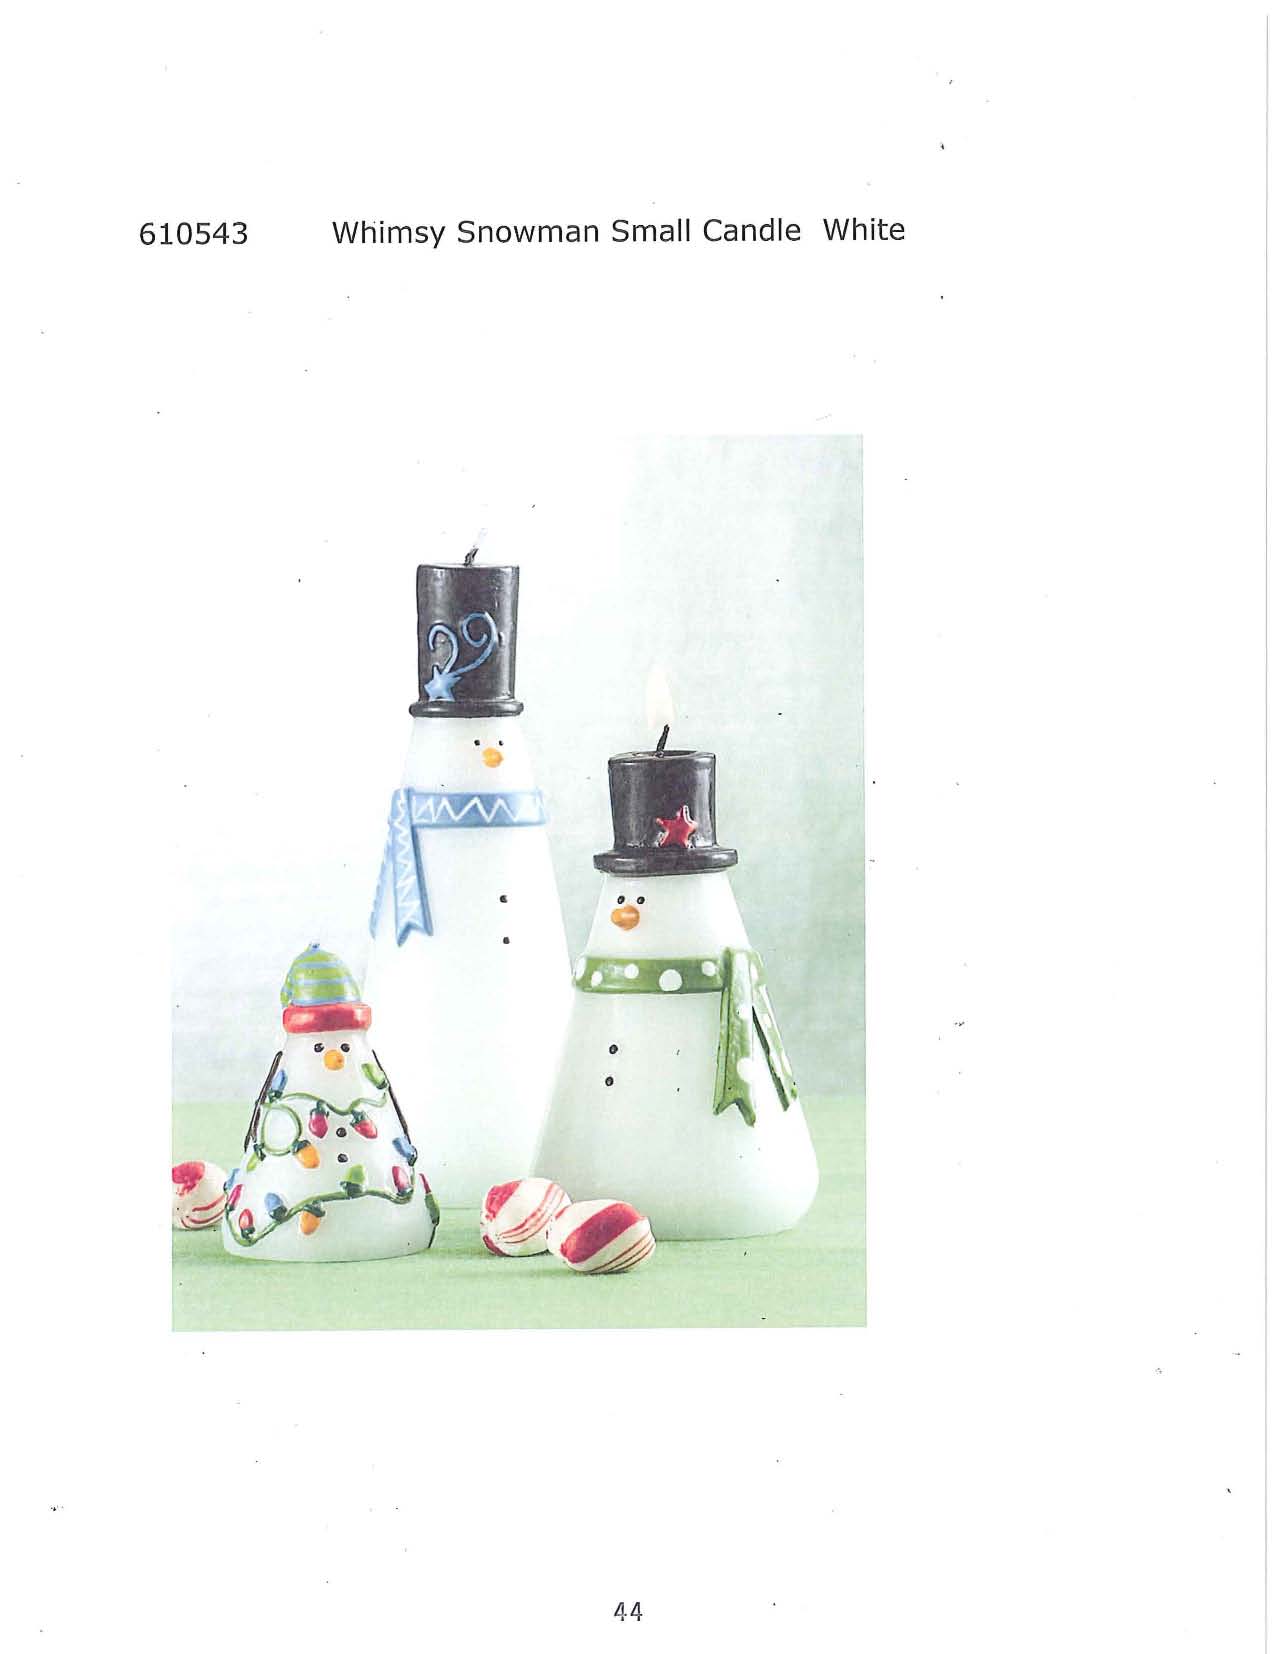 Whimsy Snowman Small Candle - White